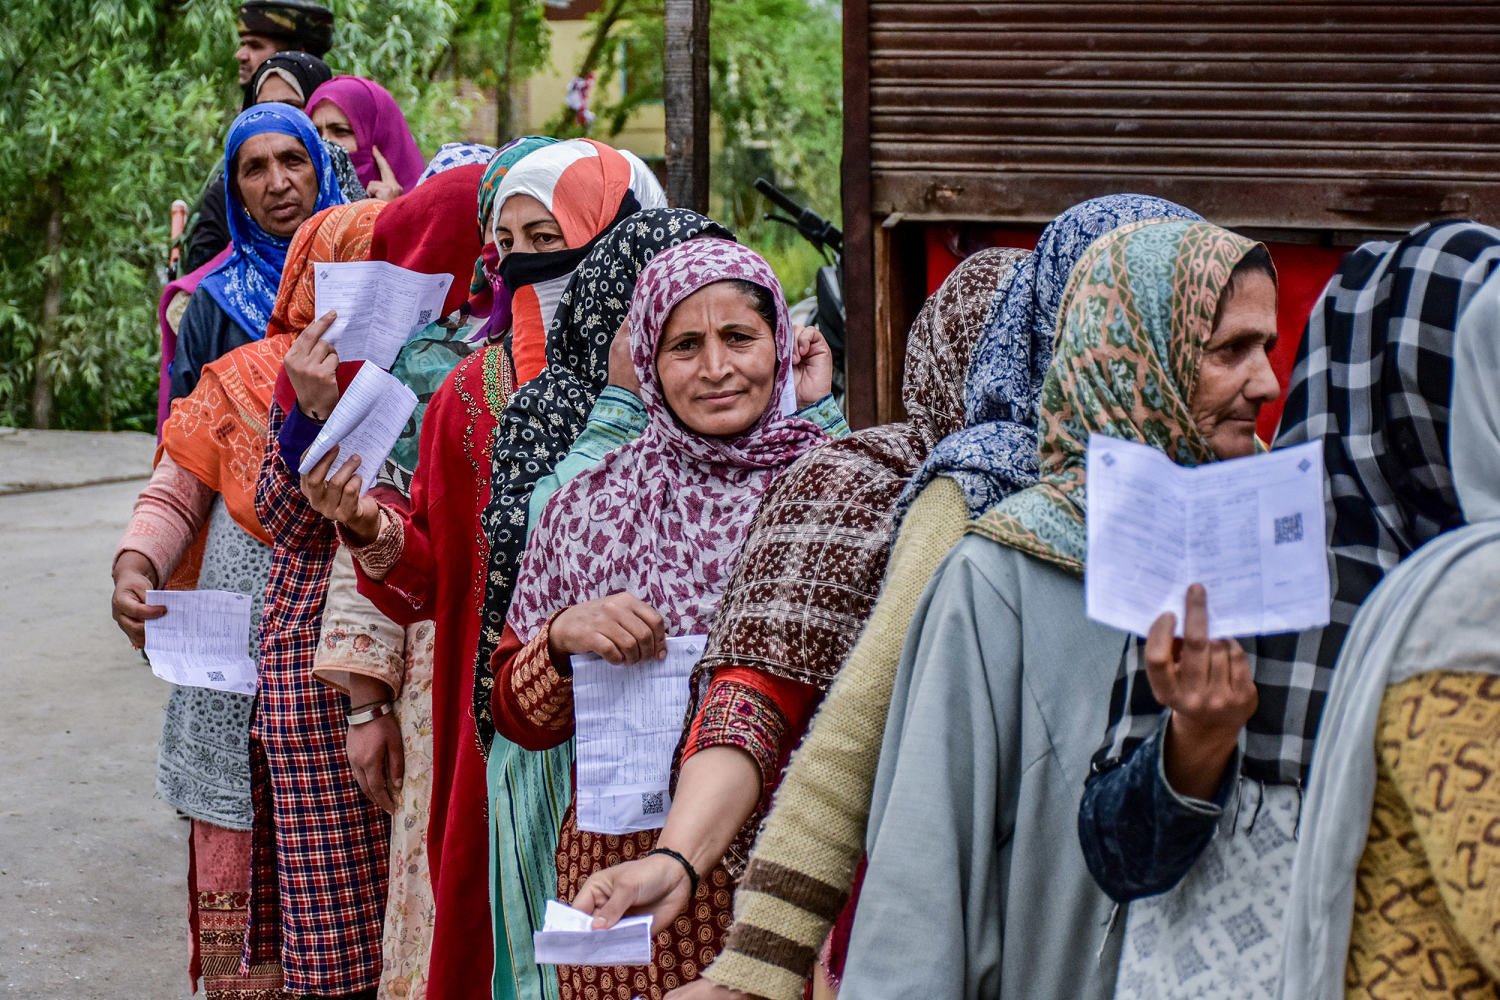 Voter turnout in India’s election has been low, but it’s surging in Kashmir